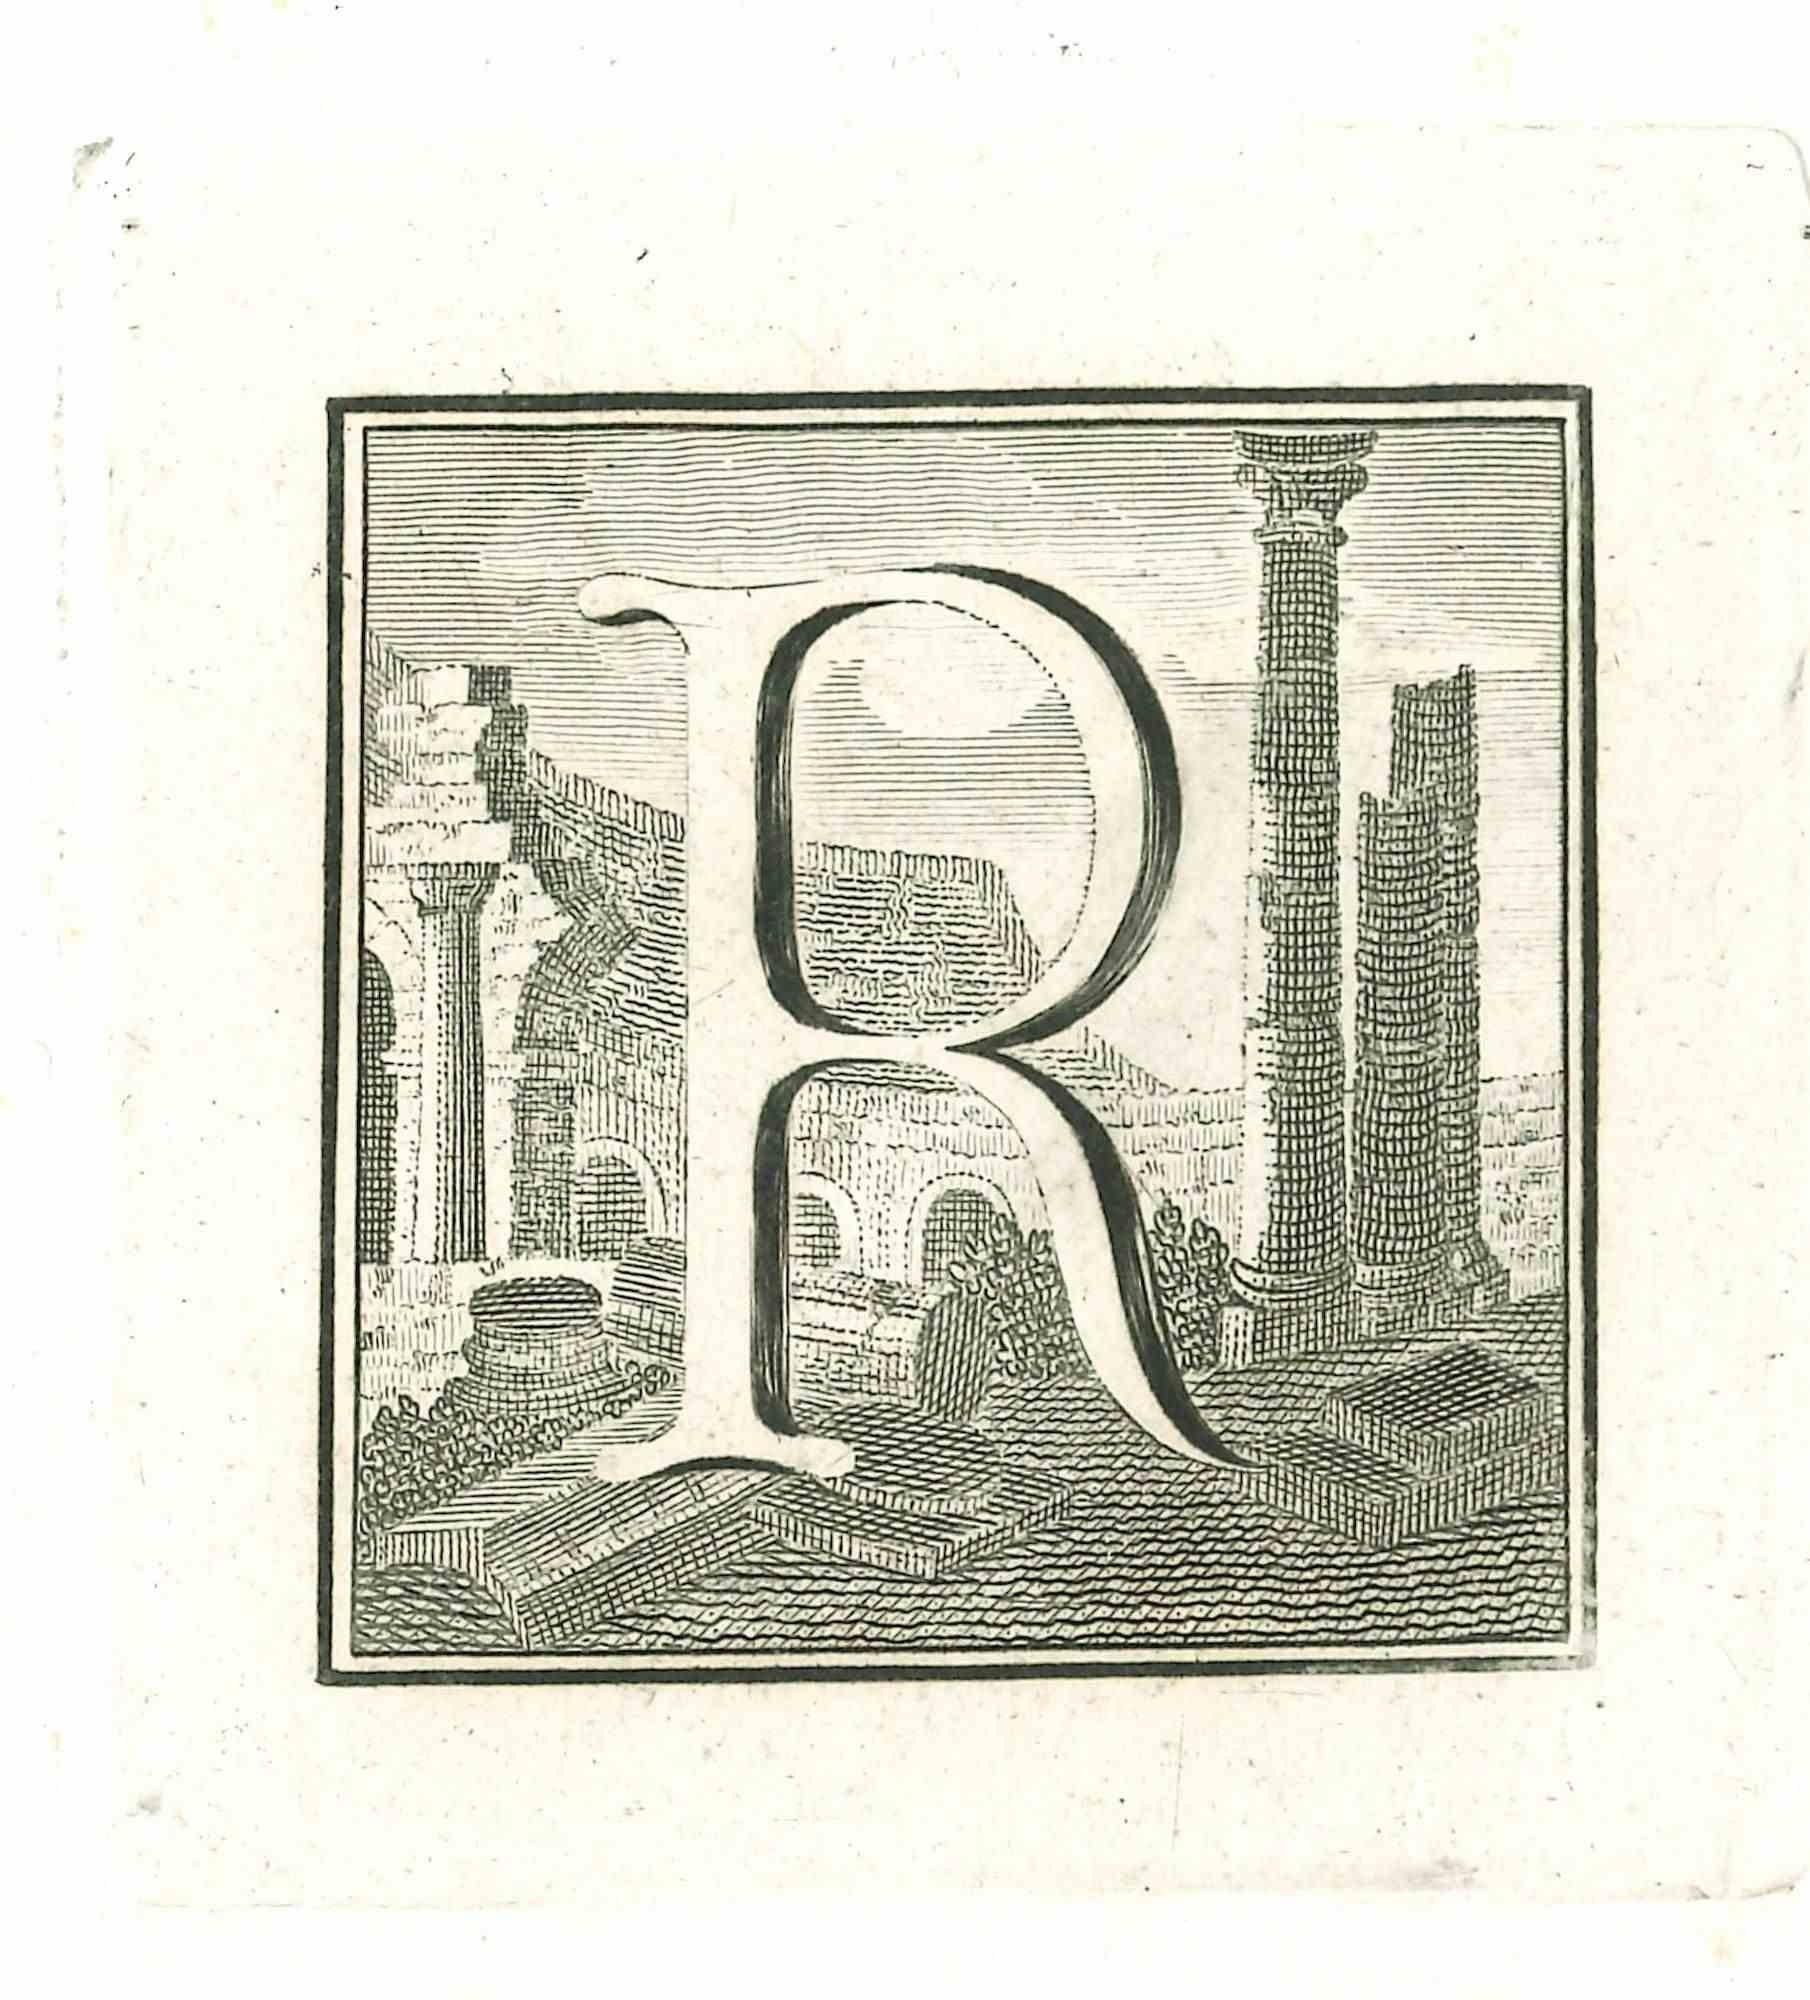 Unknown Figurative Print - Capital Letter for the Antiquities of Herculaneum Exposed-Etching-18th Century